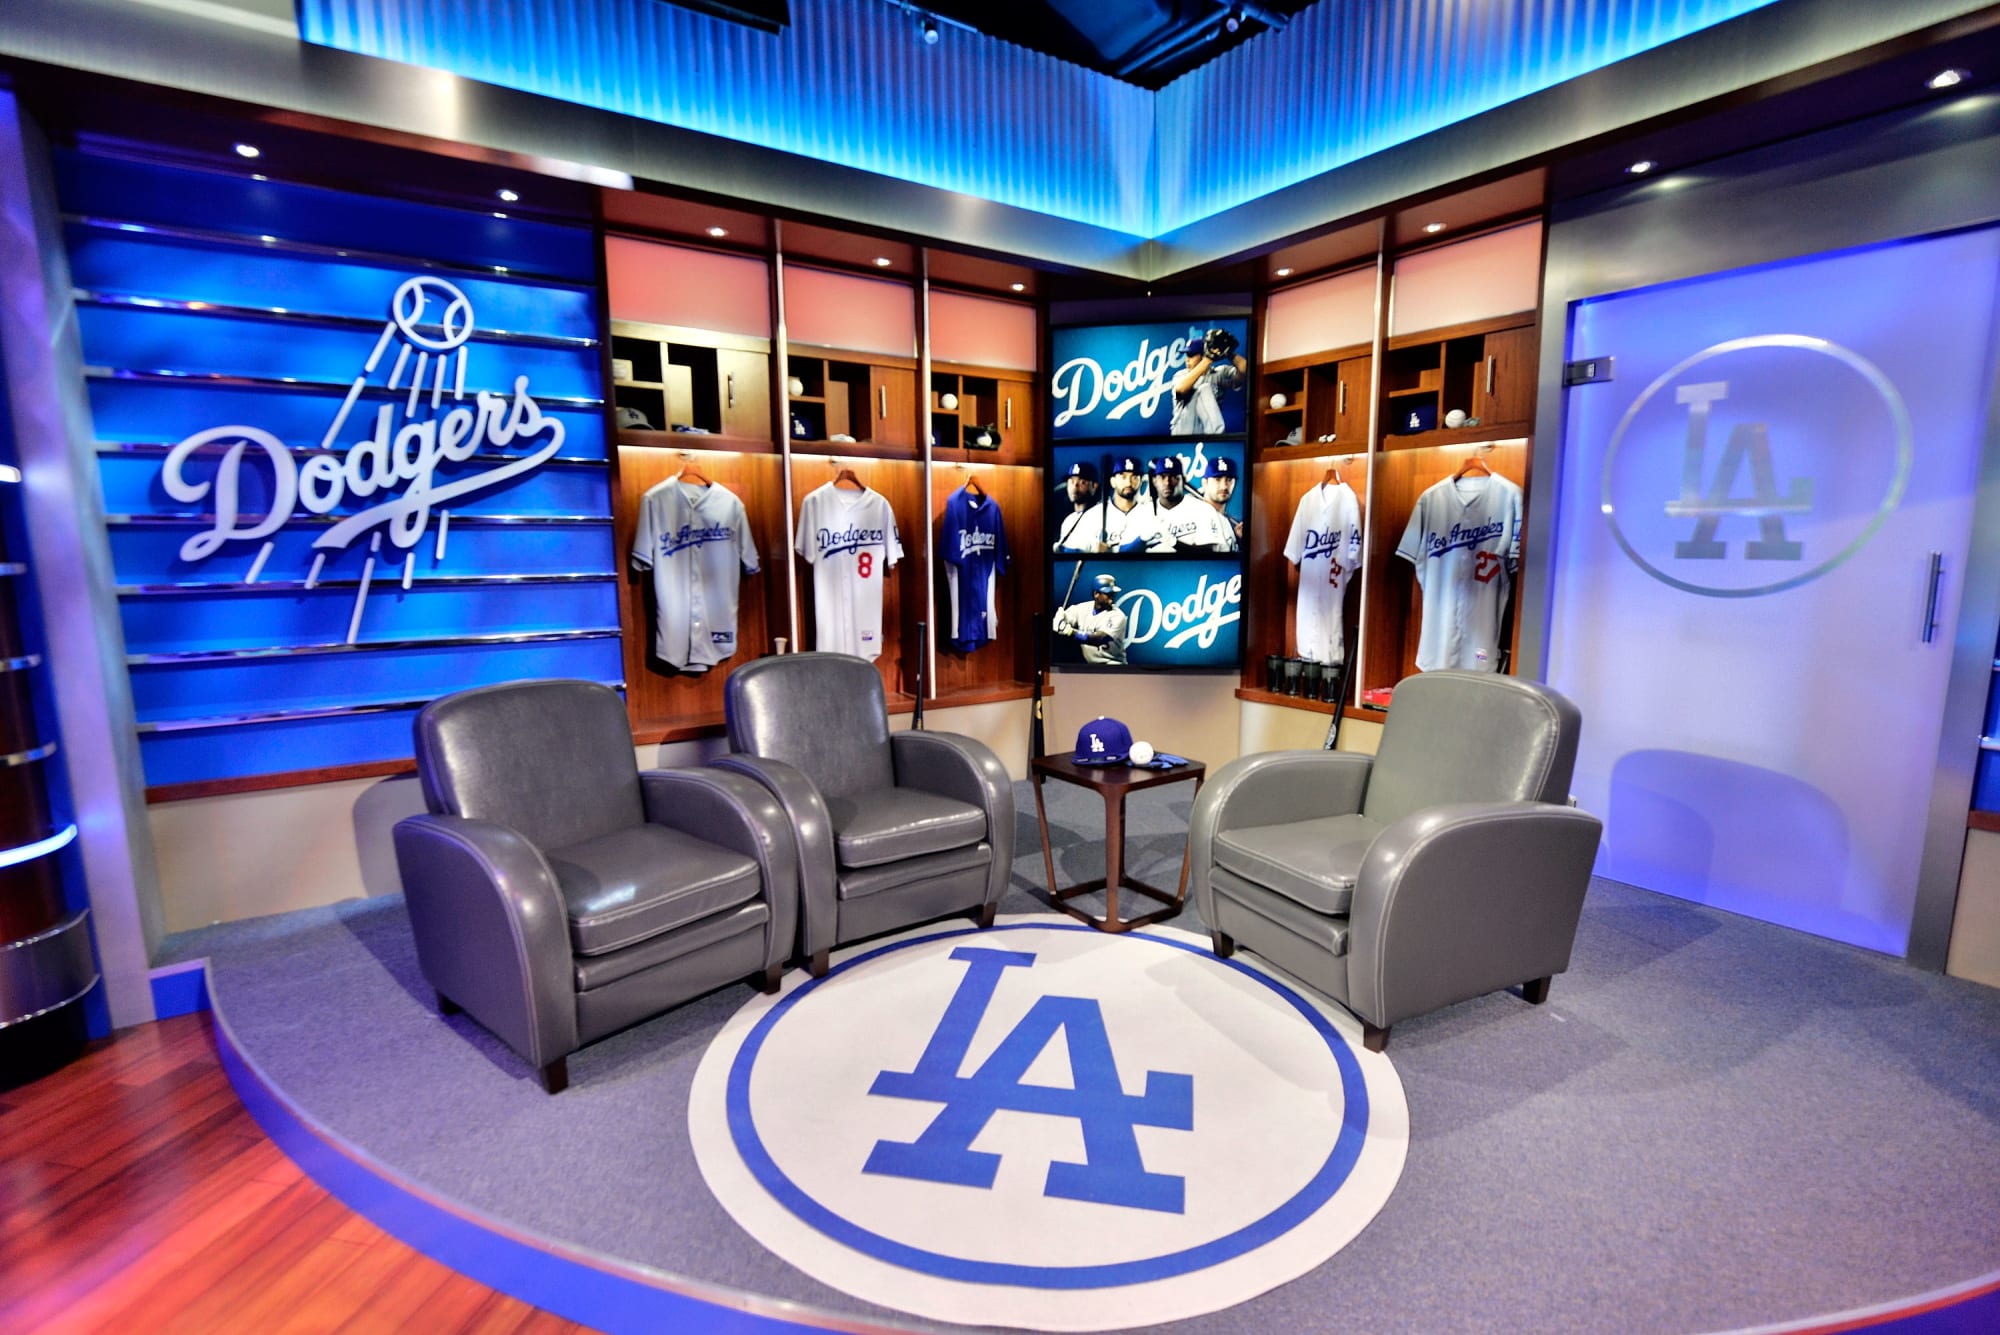 Dodgers Spectrum Network Announce Agreement to Broadcast 6 Games on KTLA